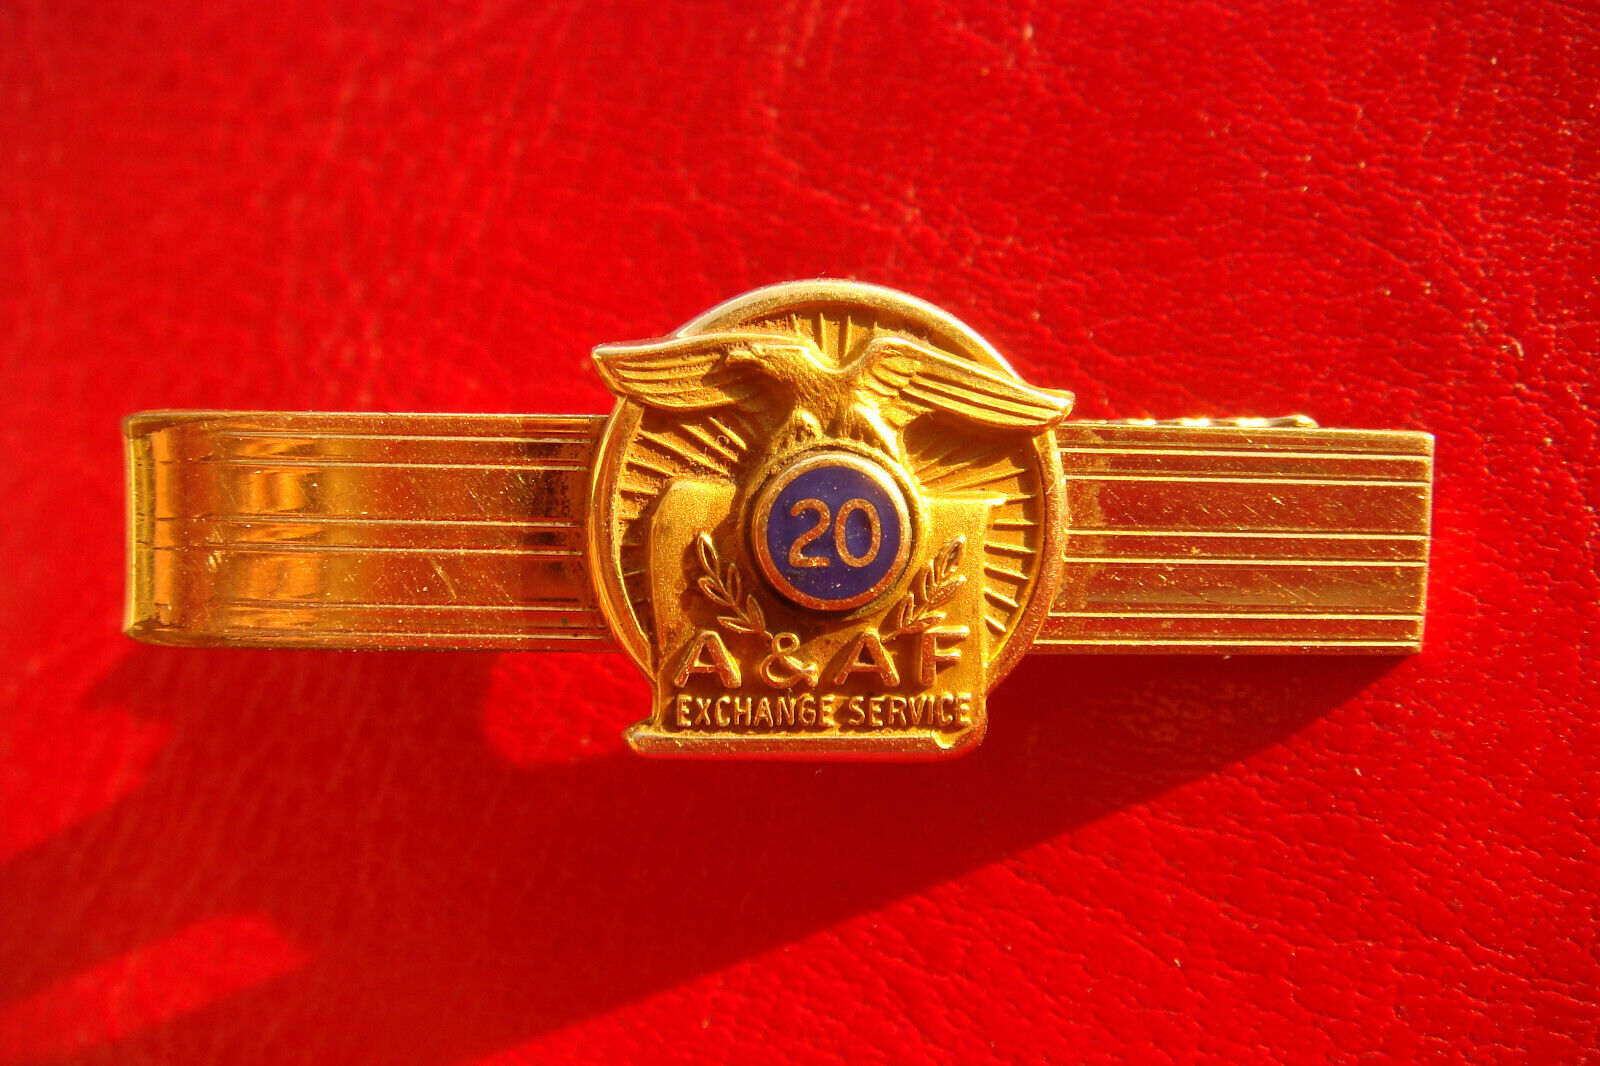 RARE 1/20 12k G.F US A&AF Army Air Force Exchange 20 years TIE PIN Pin Bar Claps